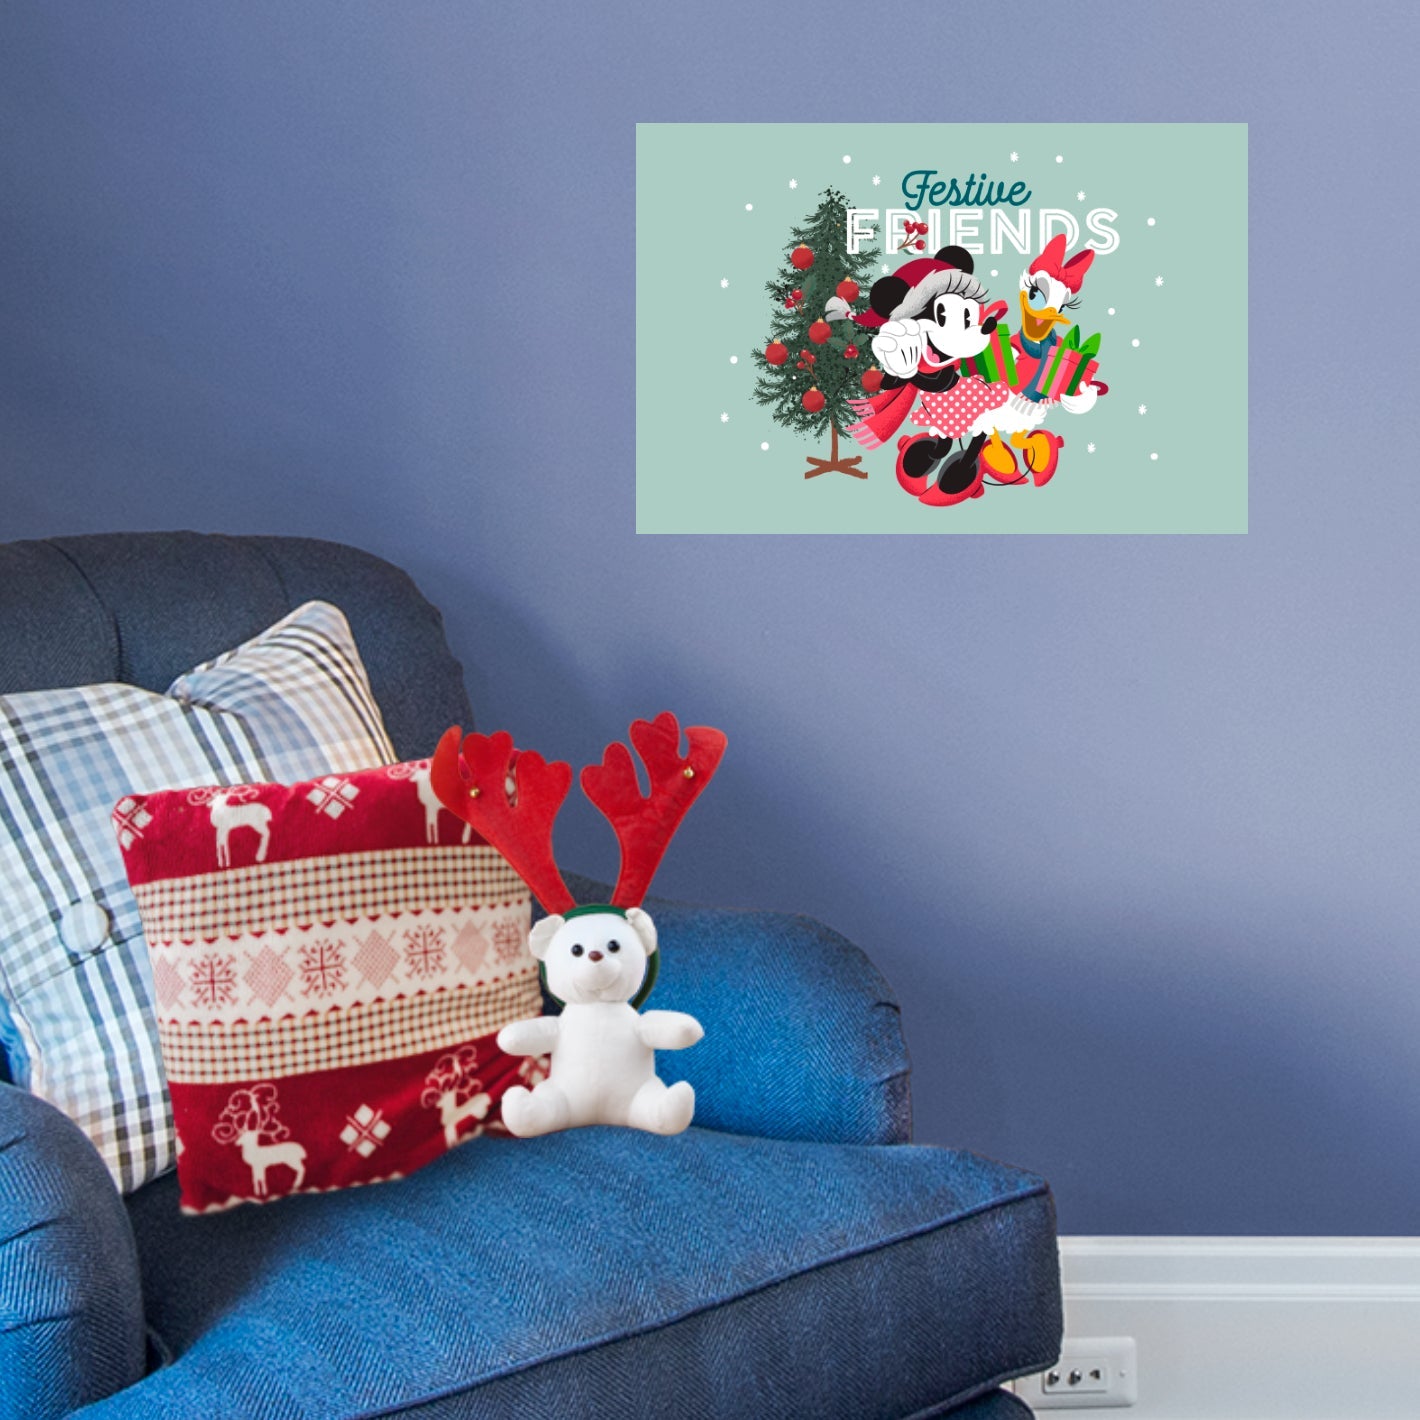 Mickey and Friends Festive Cheer: Minnie & Daisy Festive Friends Mural - Officially Licensed Disney Removable Adhesive Decal